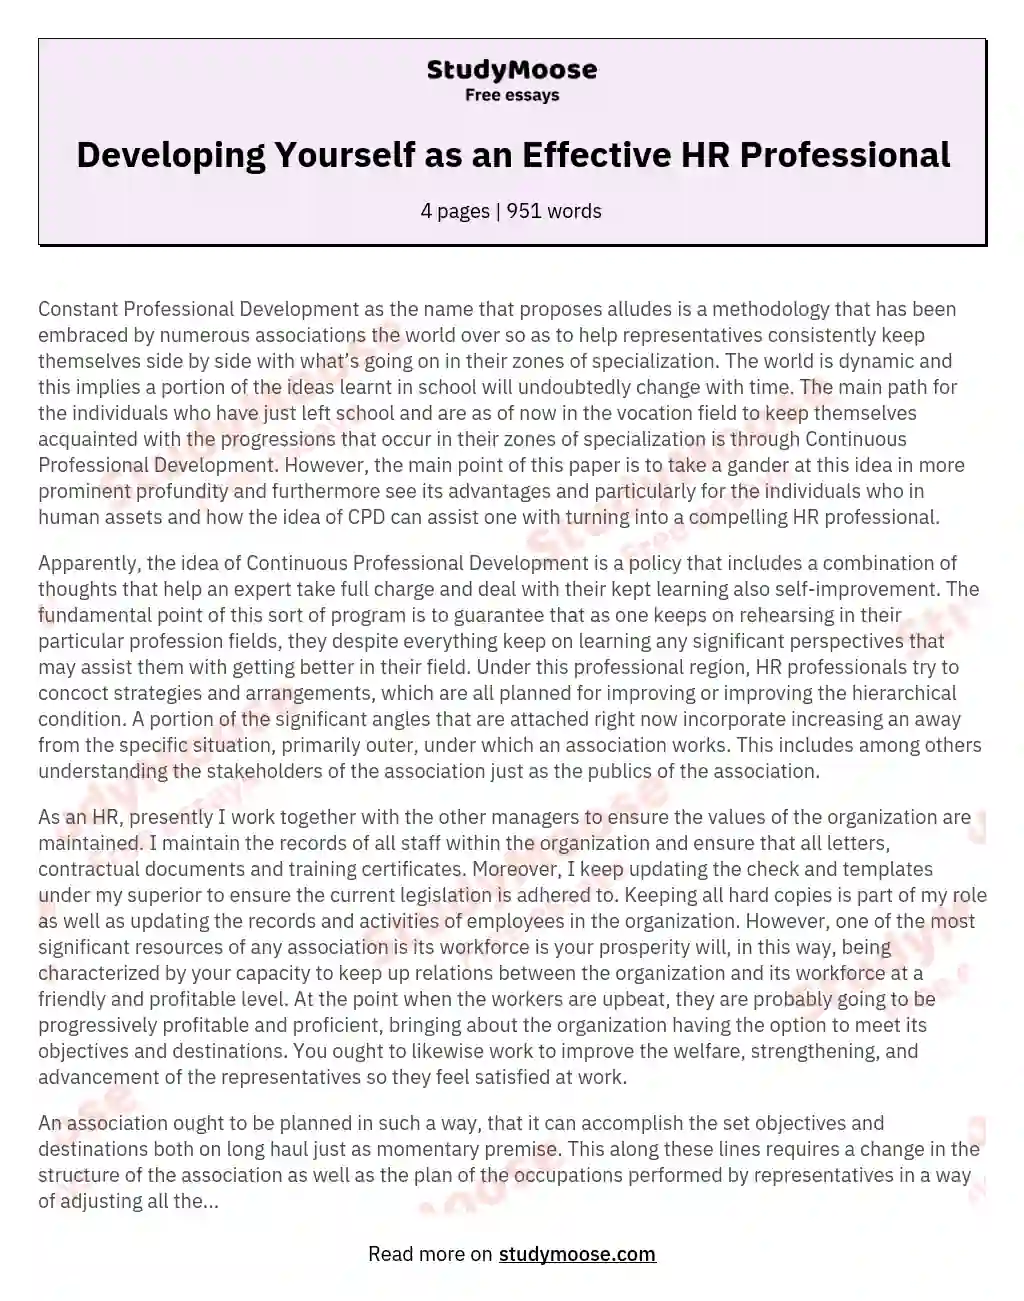 Developing Yourself as an Effective HR Professional